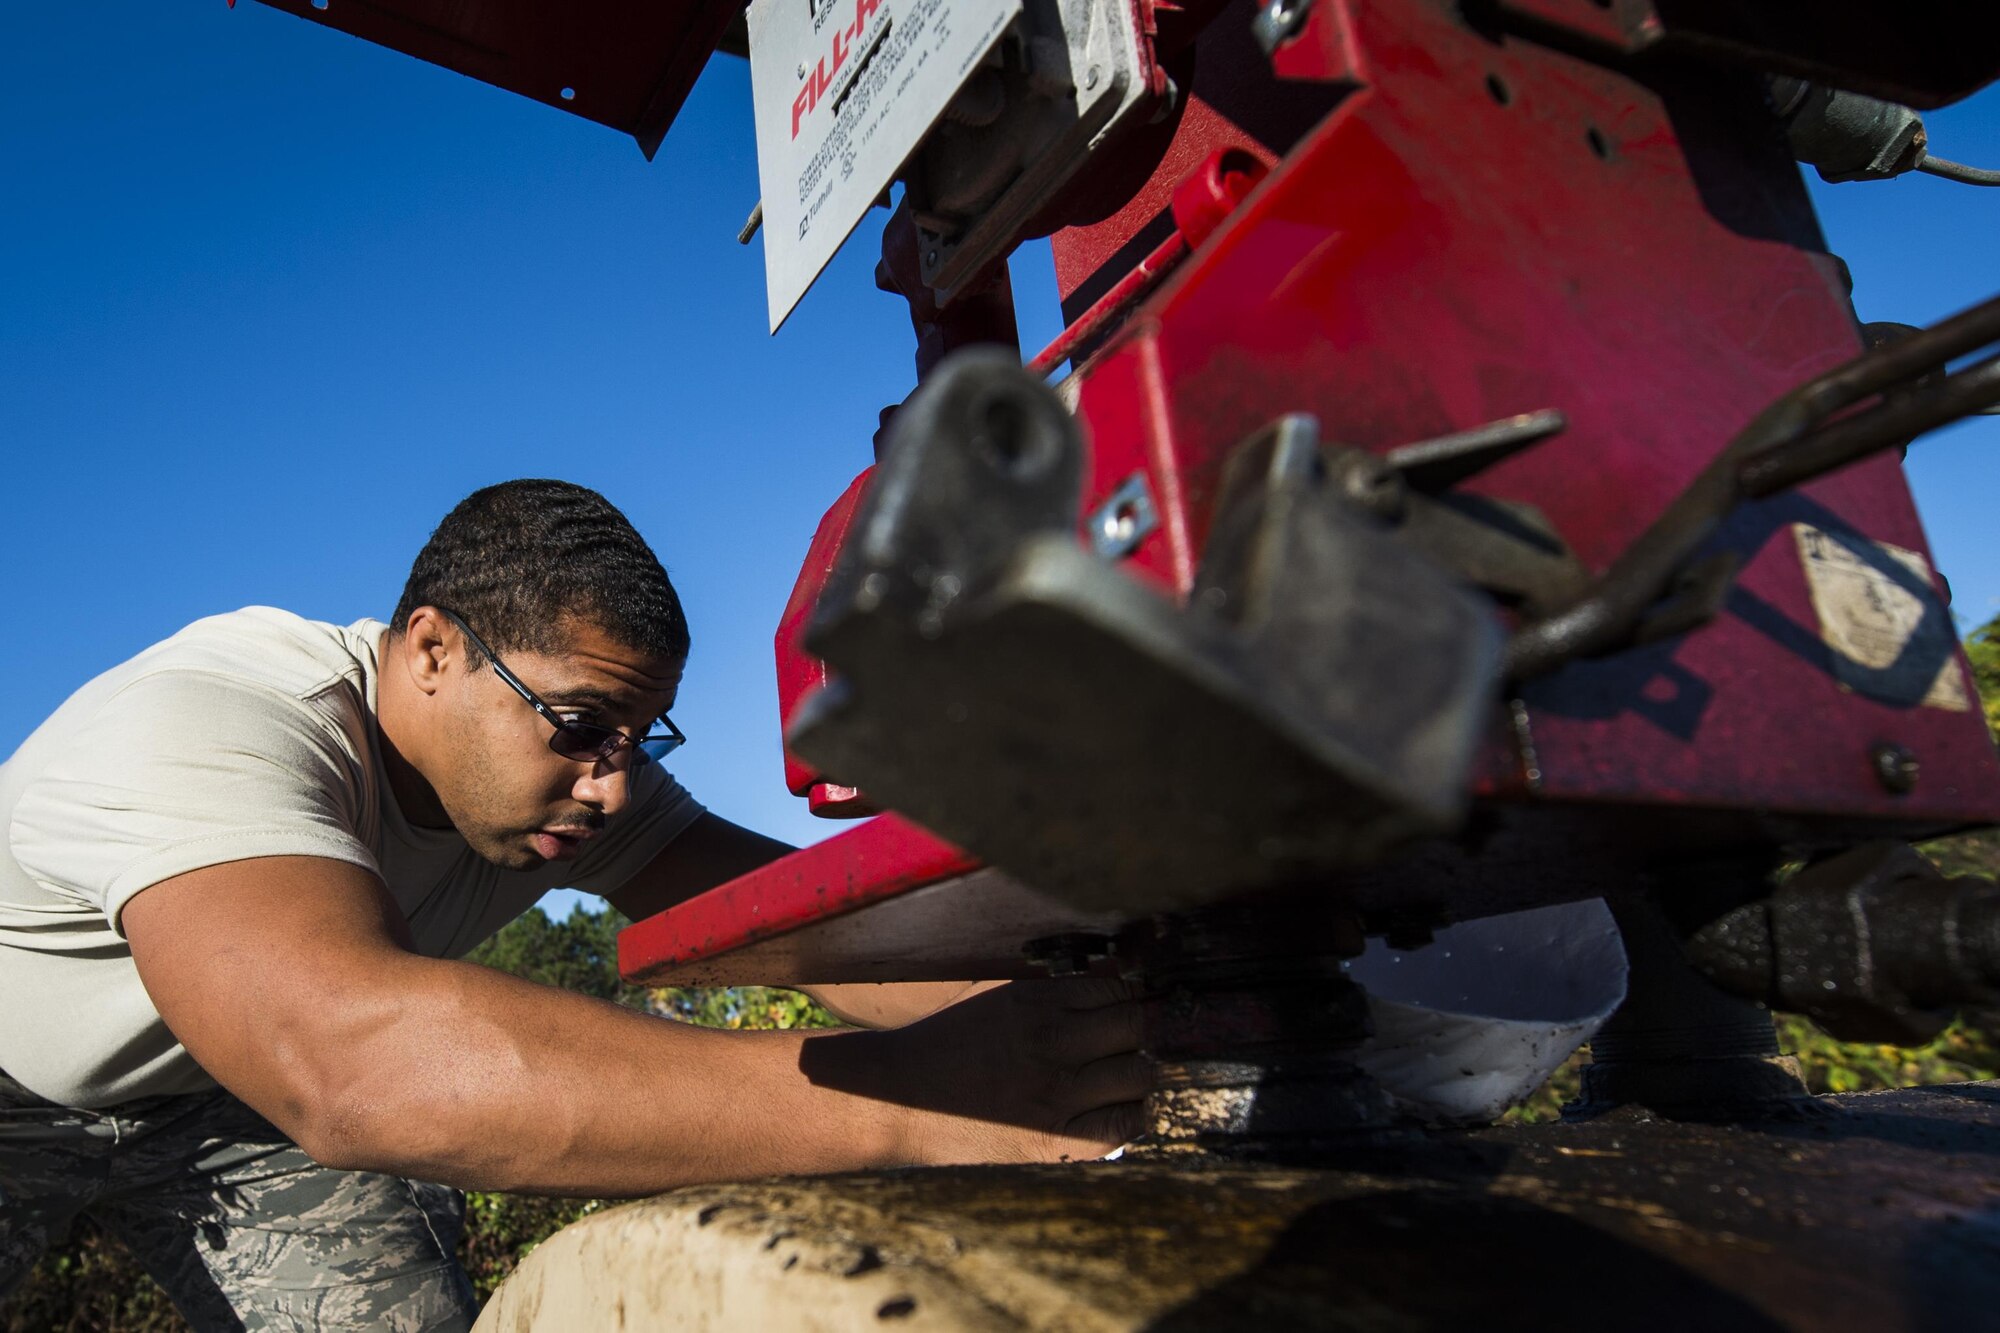 Senior Airman Chris Coney, a water and fuels system specialist with the 1st Special Operations Civil Engineer Squadron, places an absorbent pad under a fuel pump at Hurlburt Field, Fla., Nov. 17, 2016. Absorbent pads are used to control and absorb diesel, fuel, oil and other fluids while repelling water. (U.S. Air Force photo by Airman 1st Class Joseph Pick)